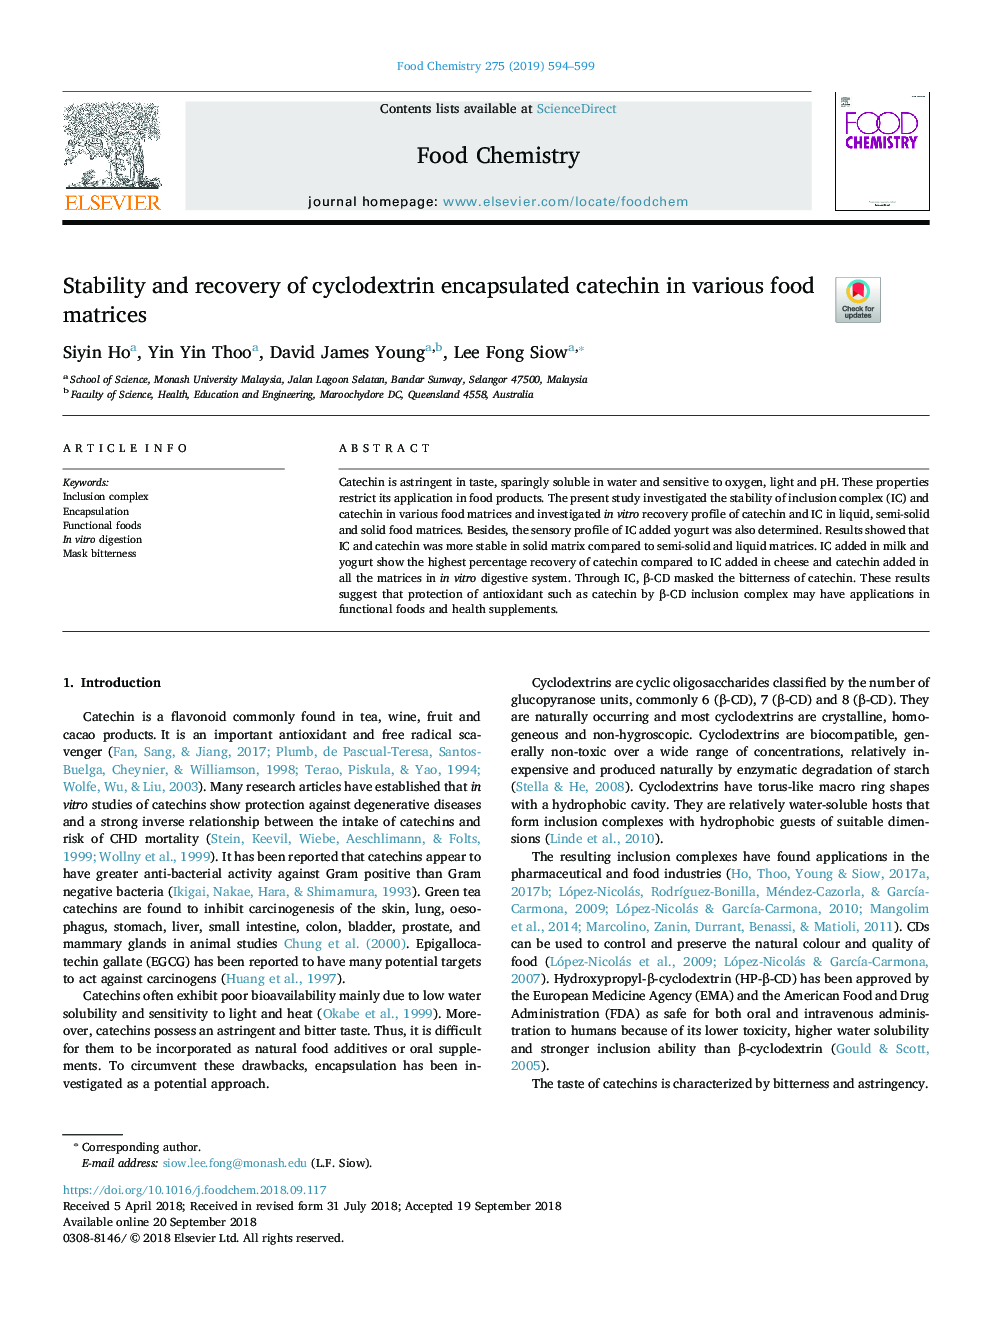 Stability and recovery of cyclodextrin encapsulated catechin in various food matrices